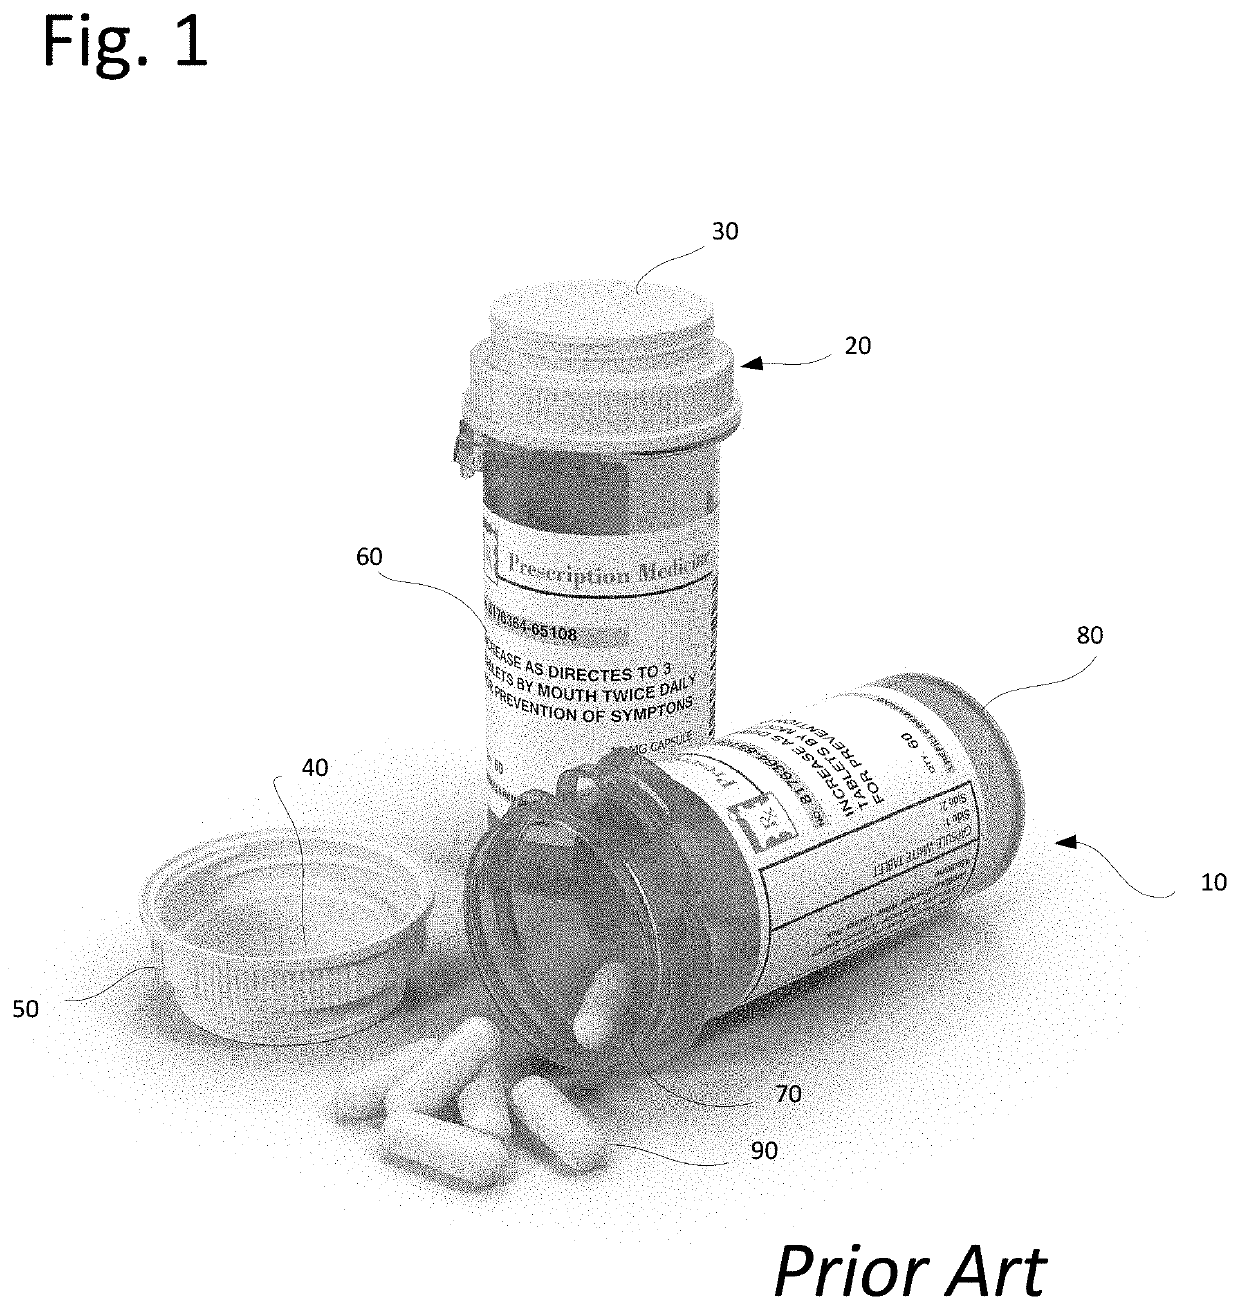 Medication Container for Dosage Compliance